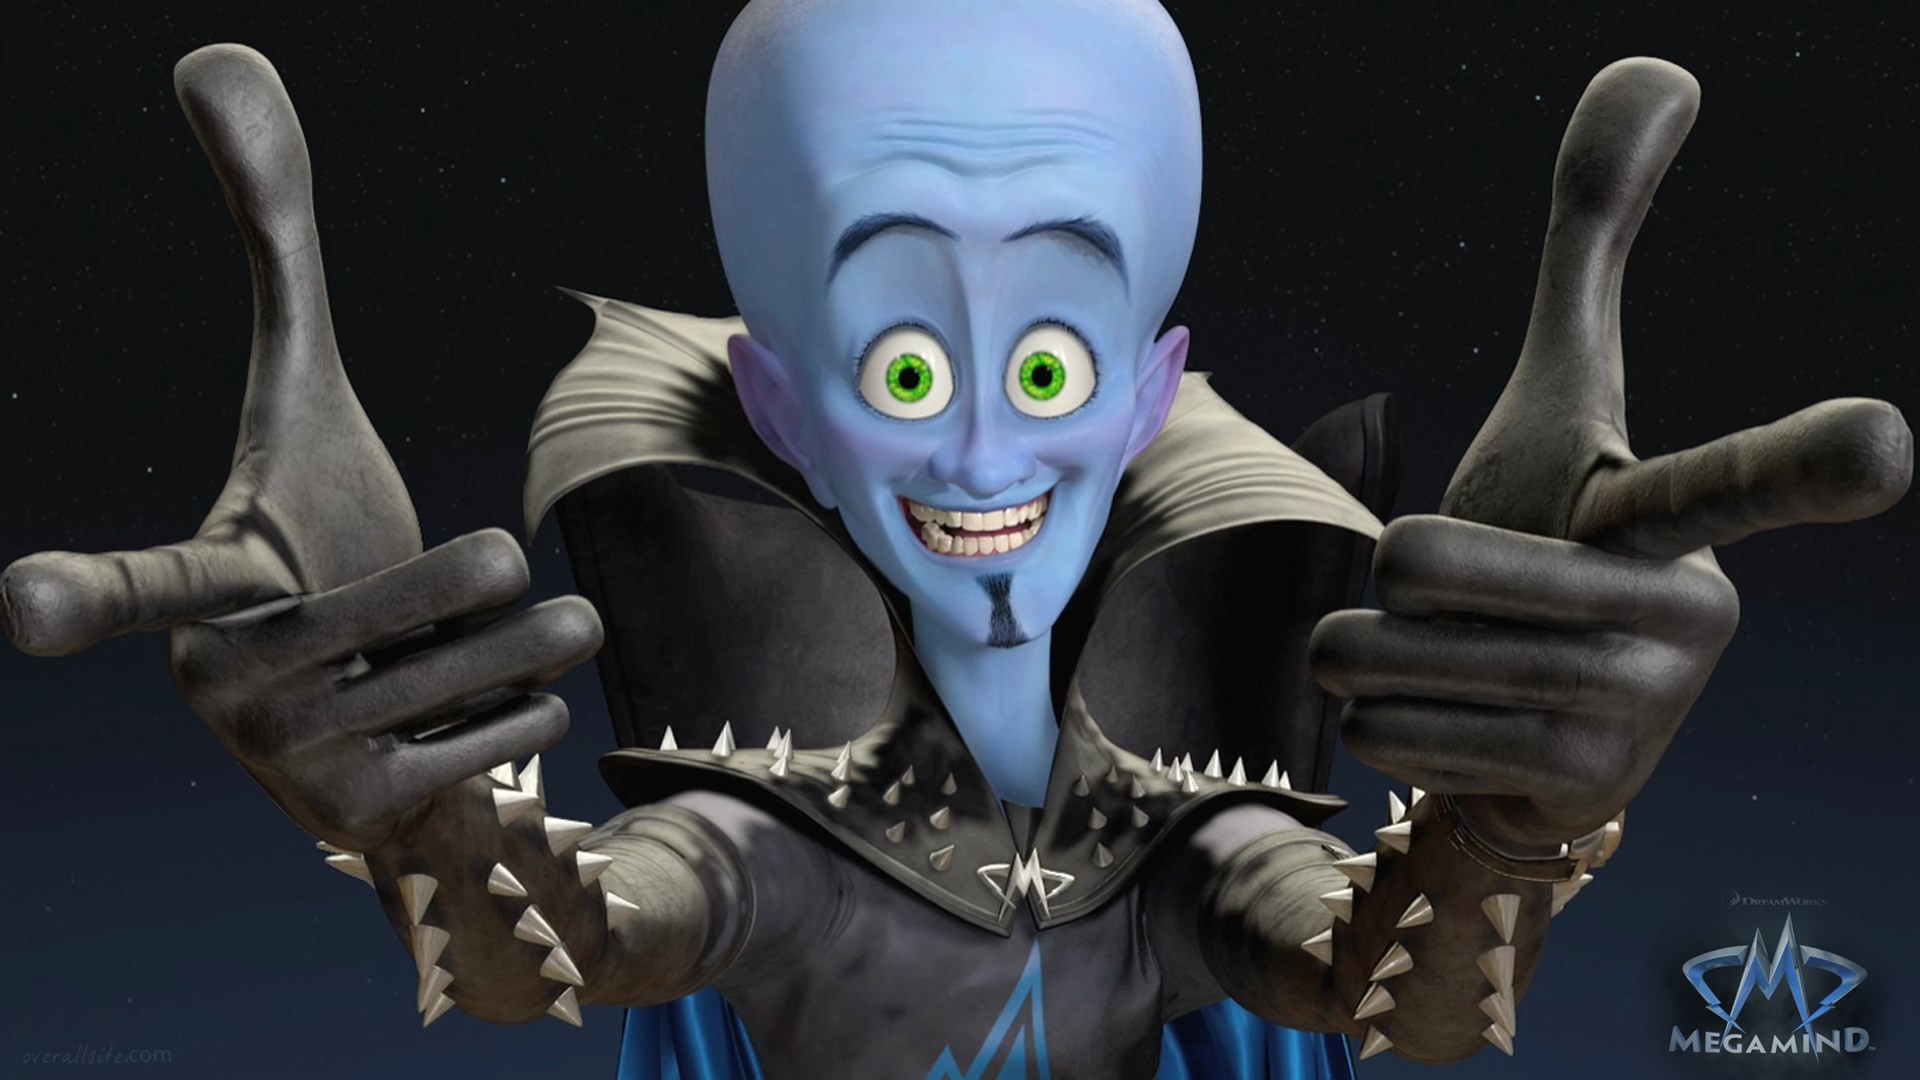 1920x1080 high resolution wallpapers widescreen megamind,  (225 kB)